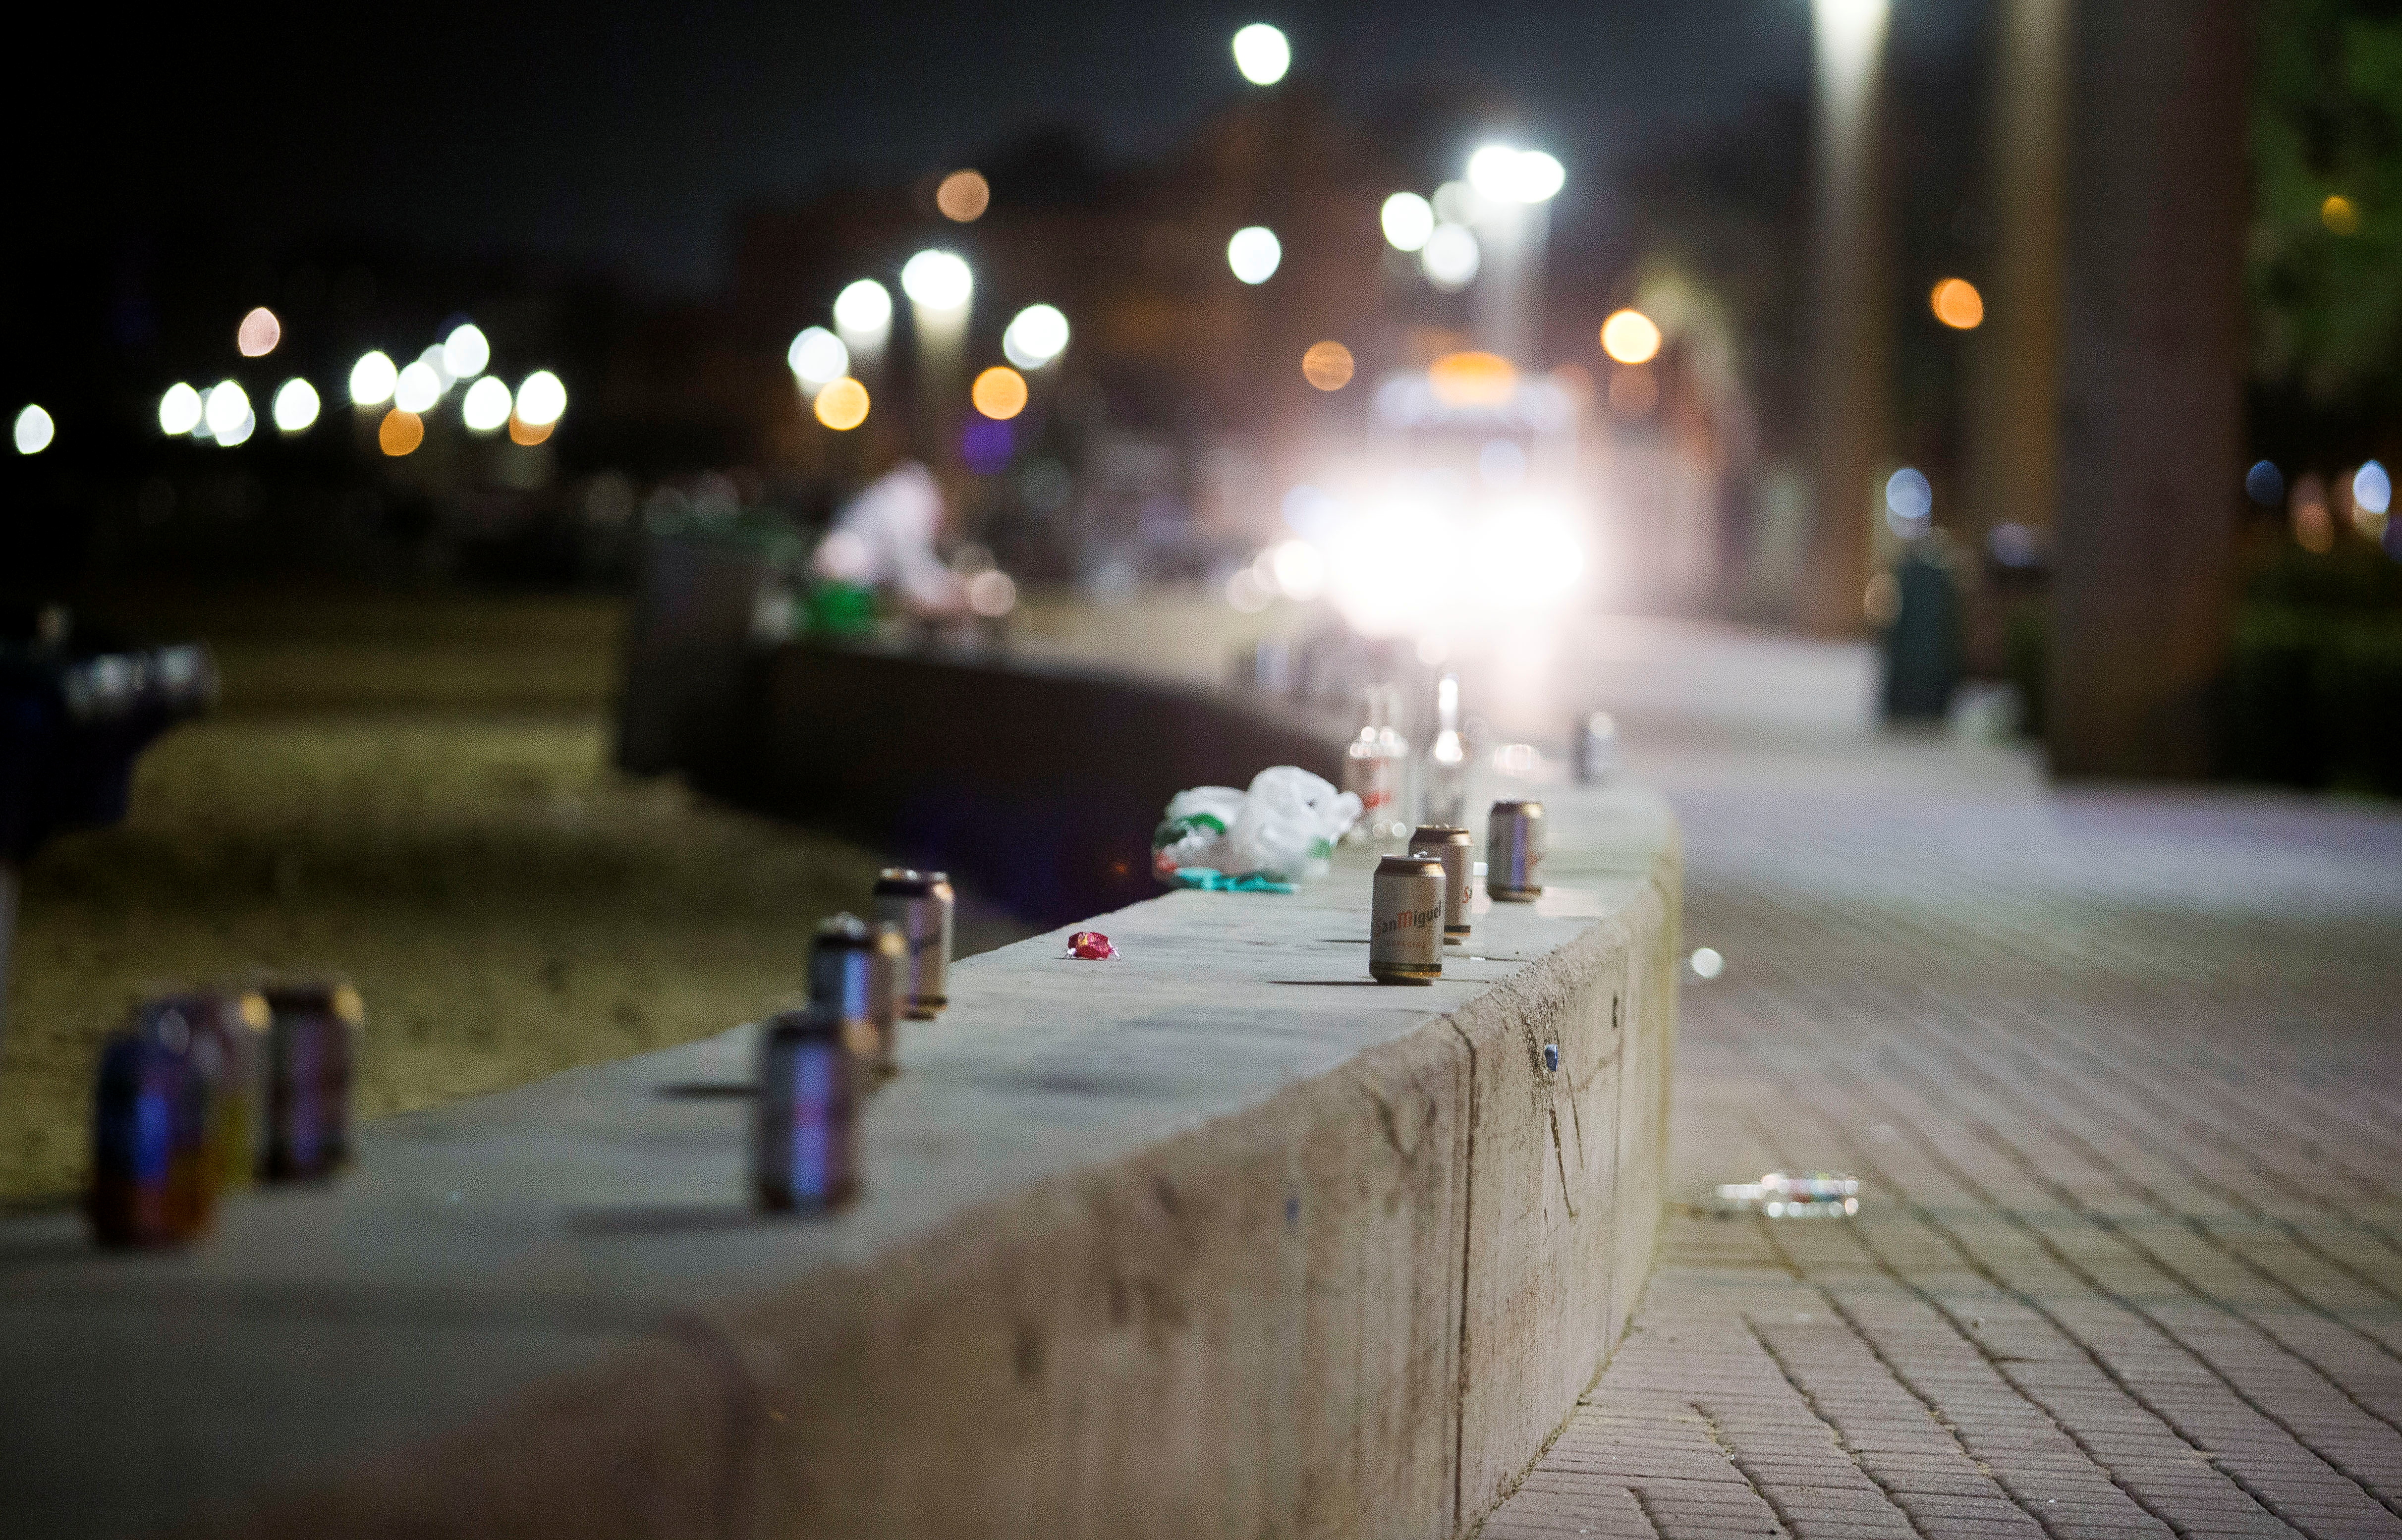 Bottles of drink and cans are seen in Playa de Palma beach on the island of Mallorca, as Spanish regions with a low coronavirus disease (COVID-19) infection rate were allowed to reopen nightlife with some restrictions, in Mallorca, Spain, June 5, 2021. REUTERS/Enrique Calvo